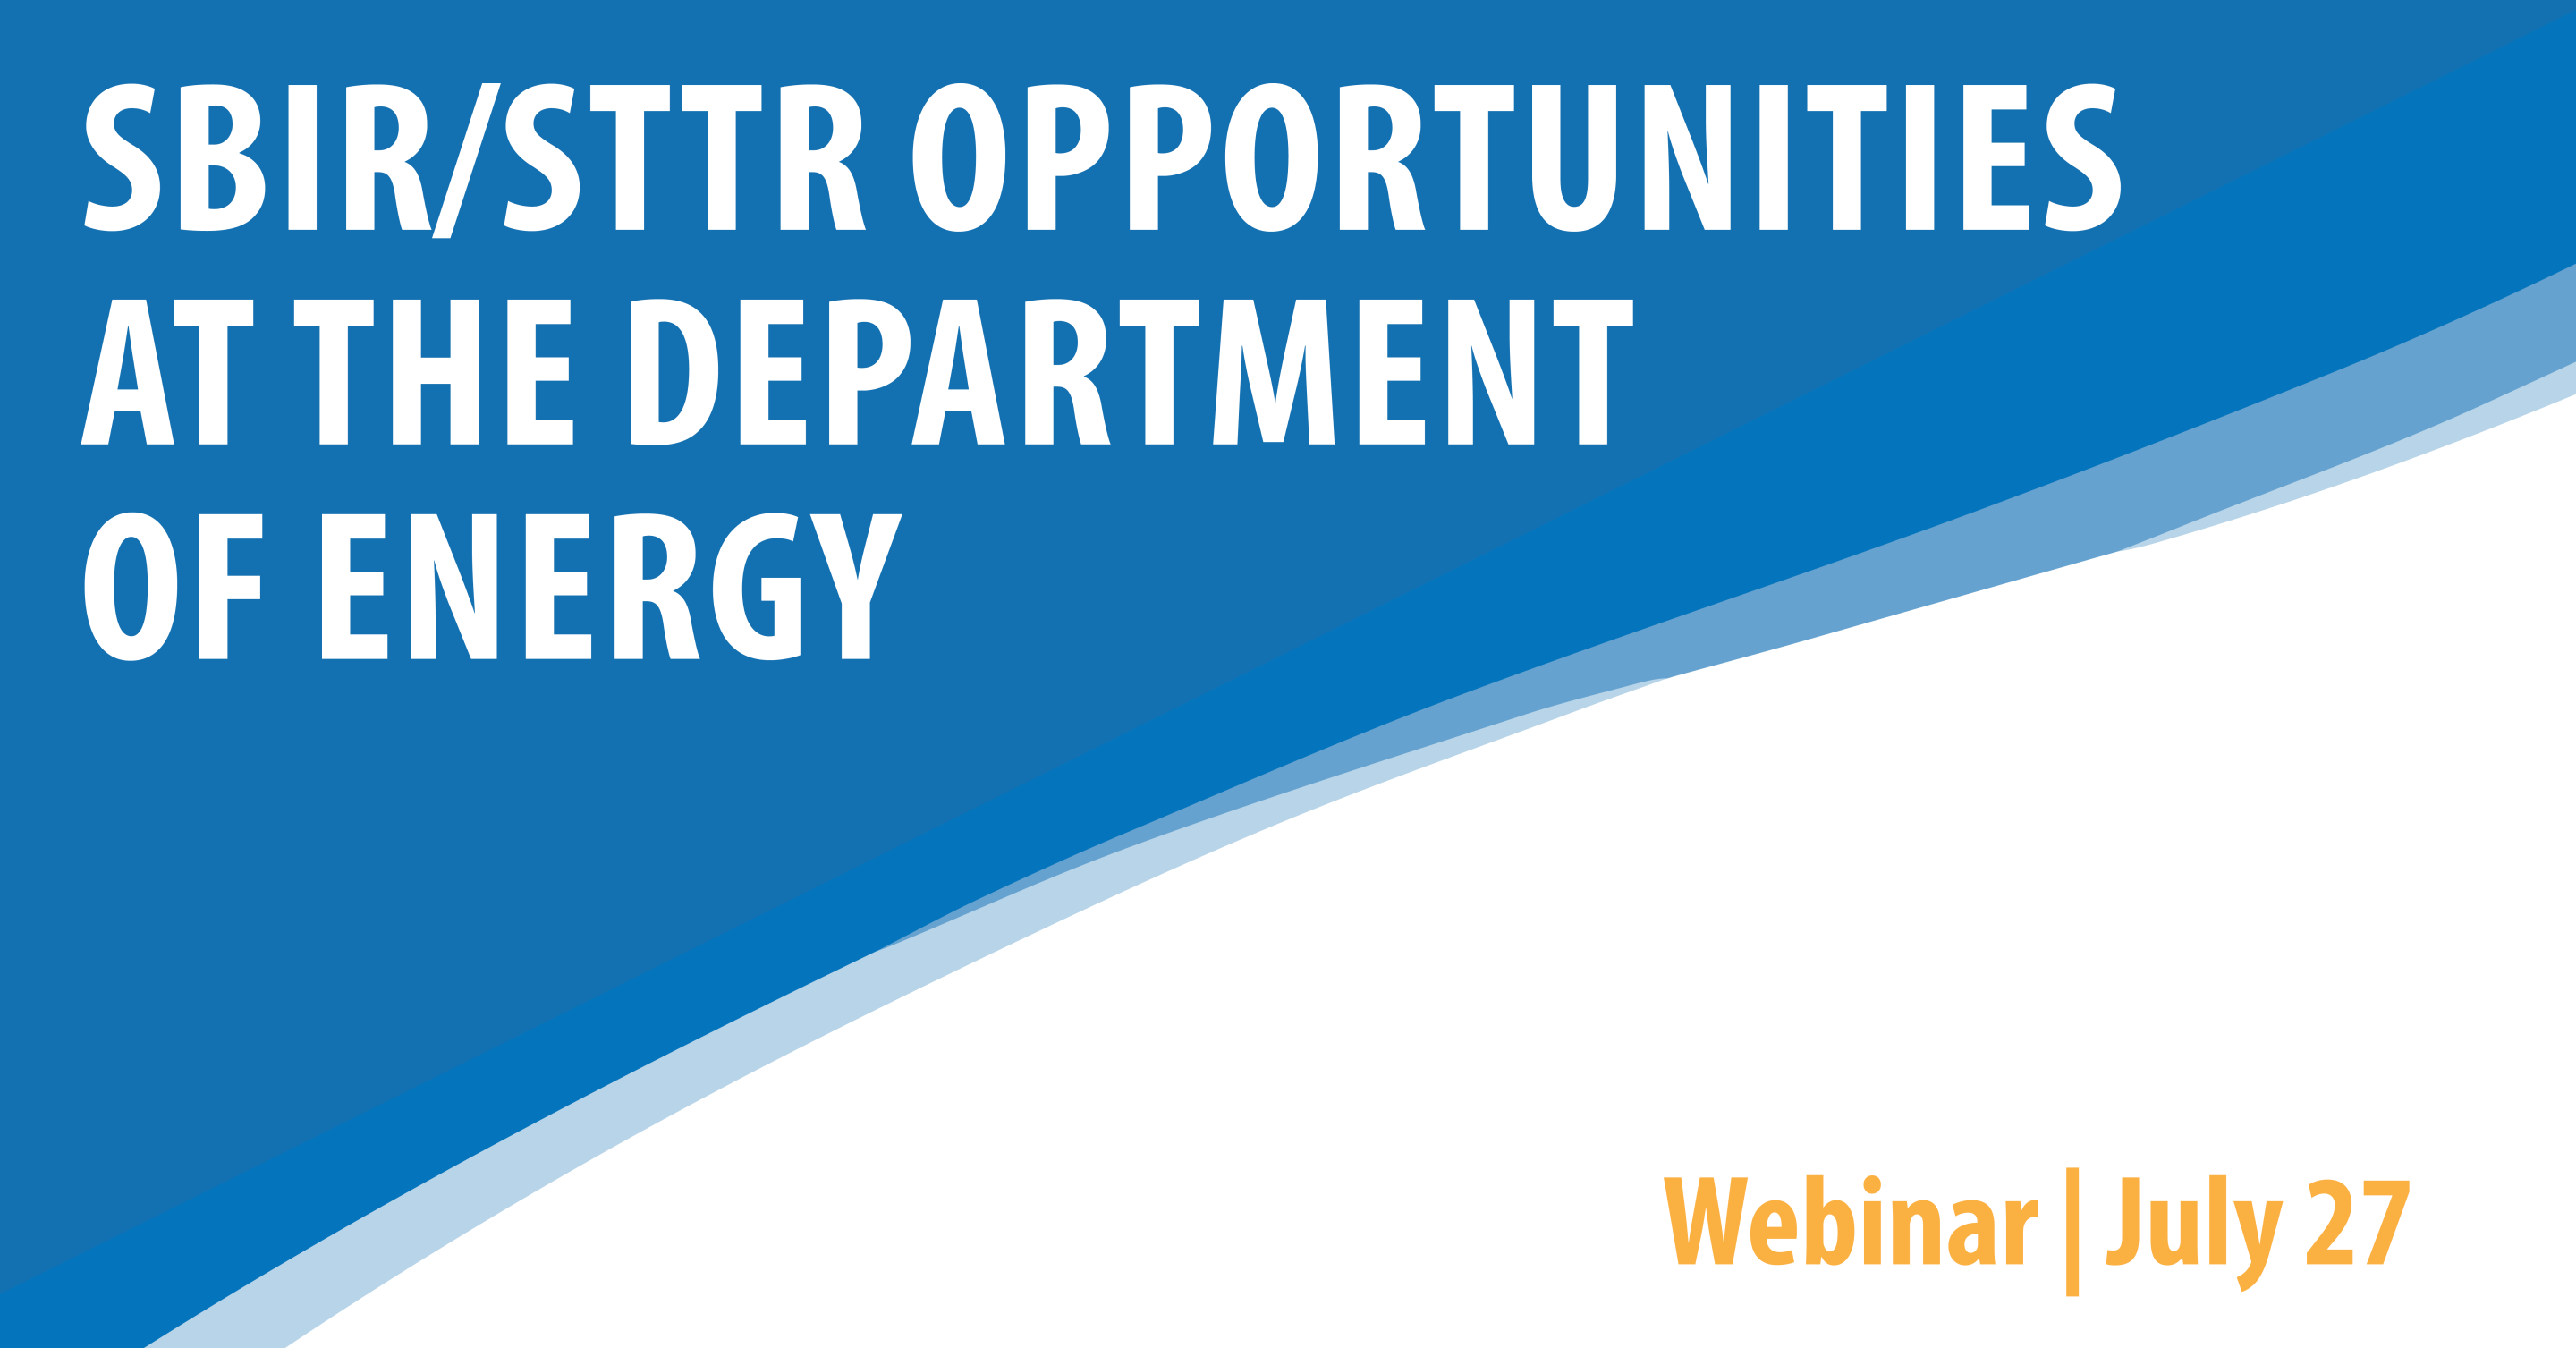 SBIR/STTR Opportunities at the Department of Energy